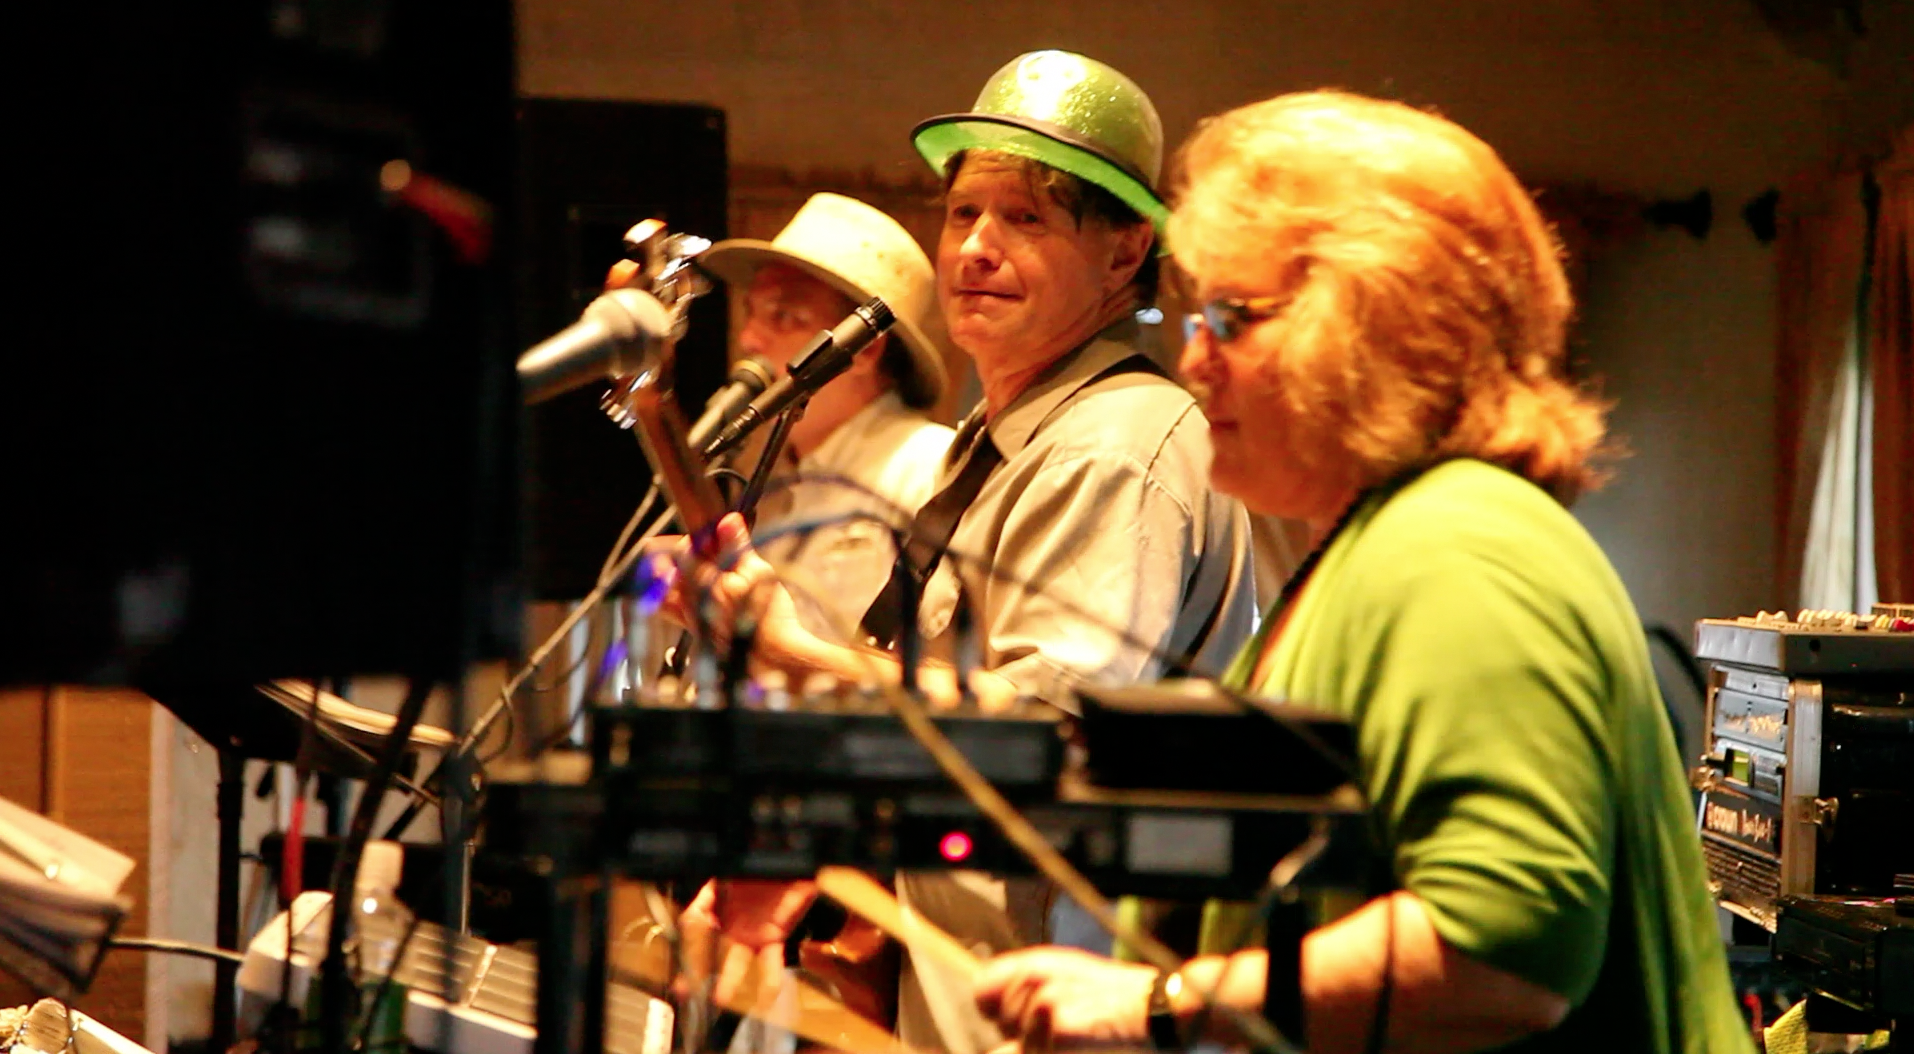 Alfredo, Alex and Lina during the Clockwork performance at the 94th Aero Squadron in Miami Florida on March 16, 2012